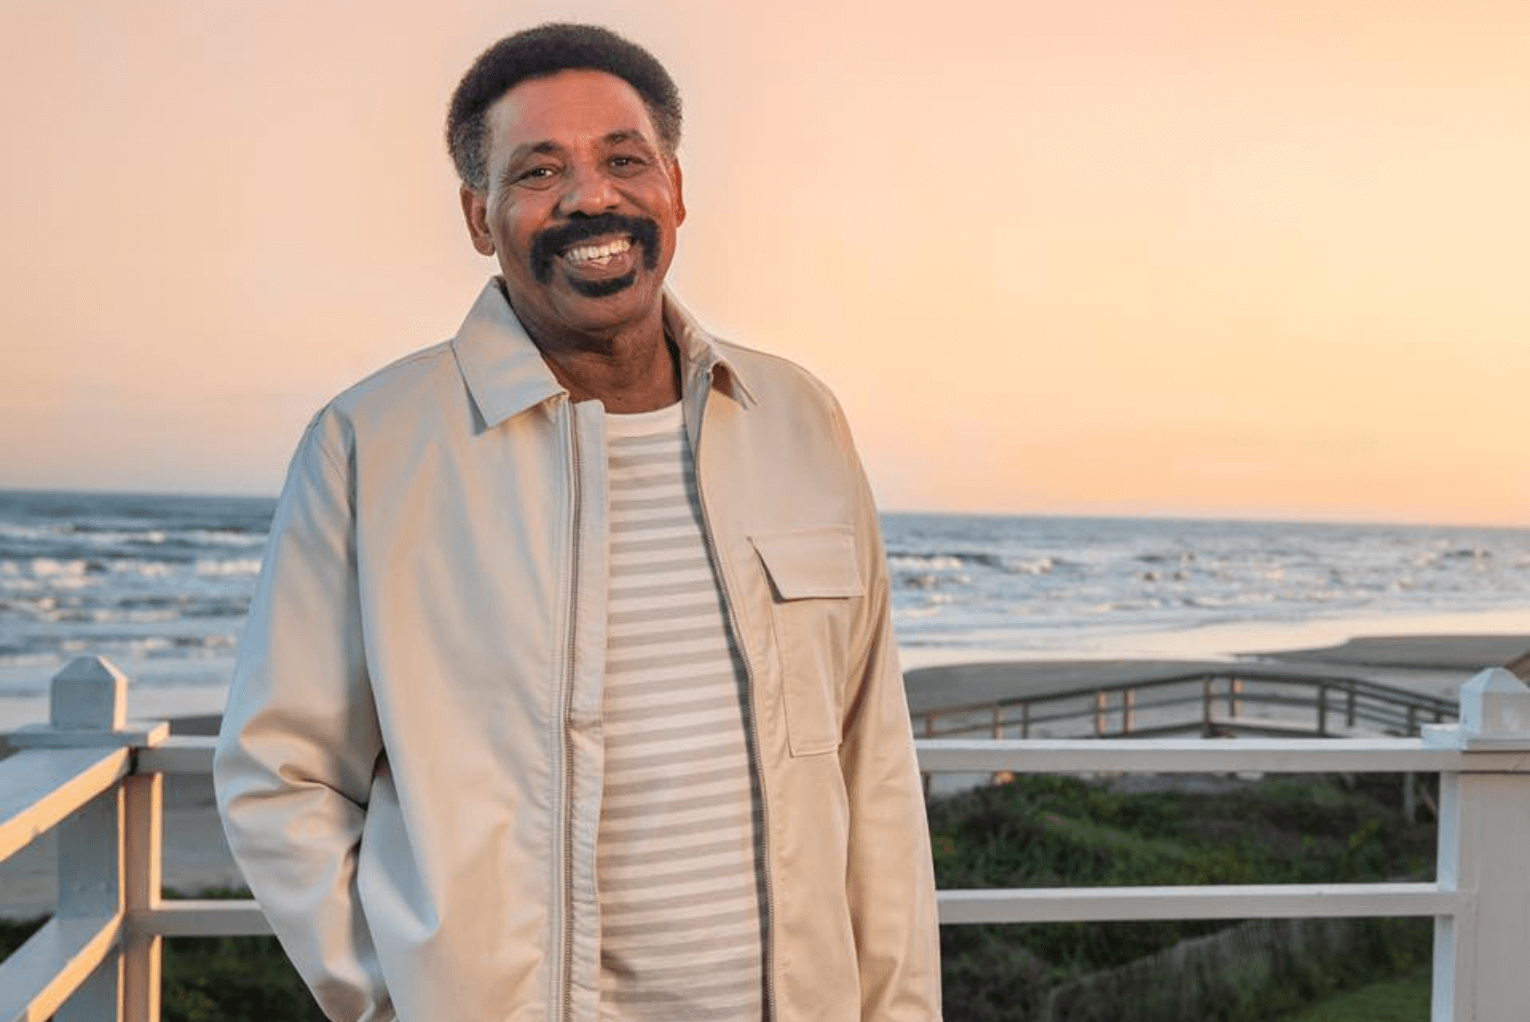 Tony Evans’ Son on Controversy: ‘We Already Have Victory’